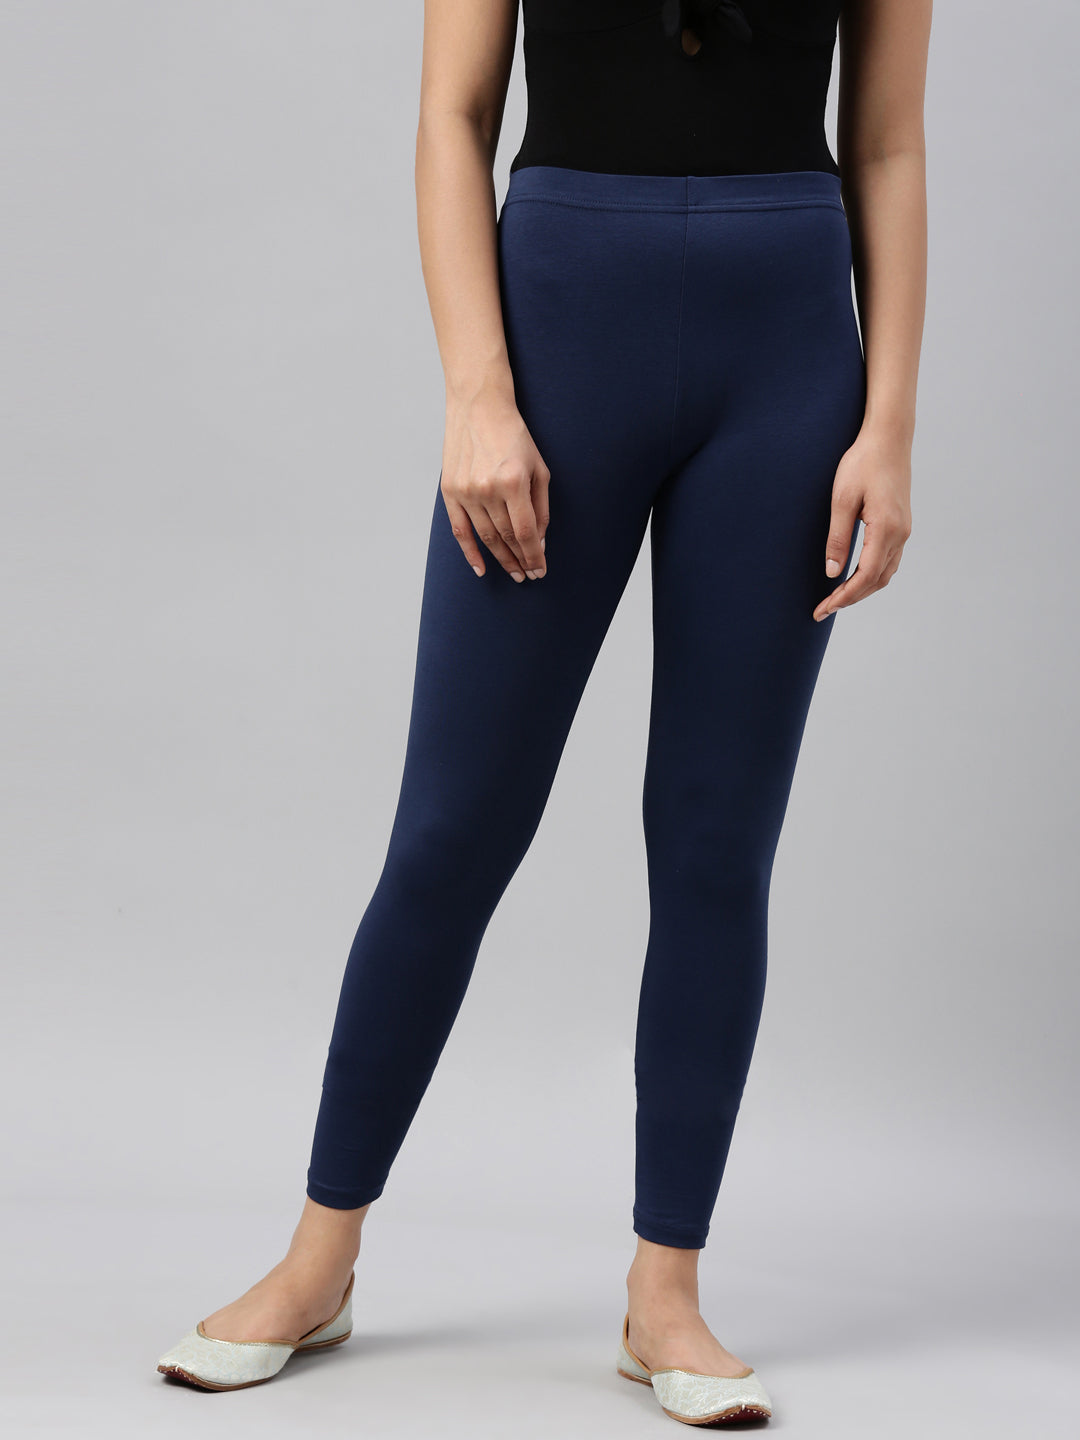 Buy Black current Leggings for Women by GO COLORS Online | Ajio.com